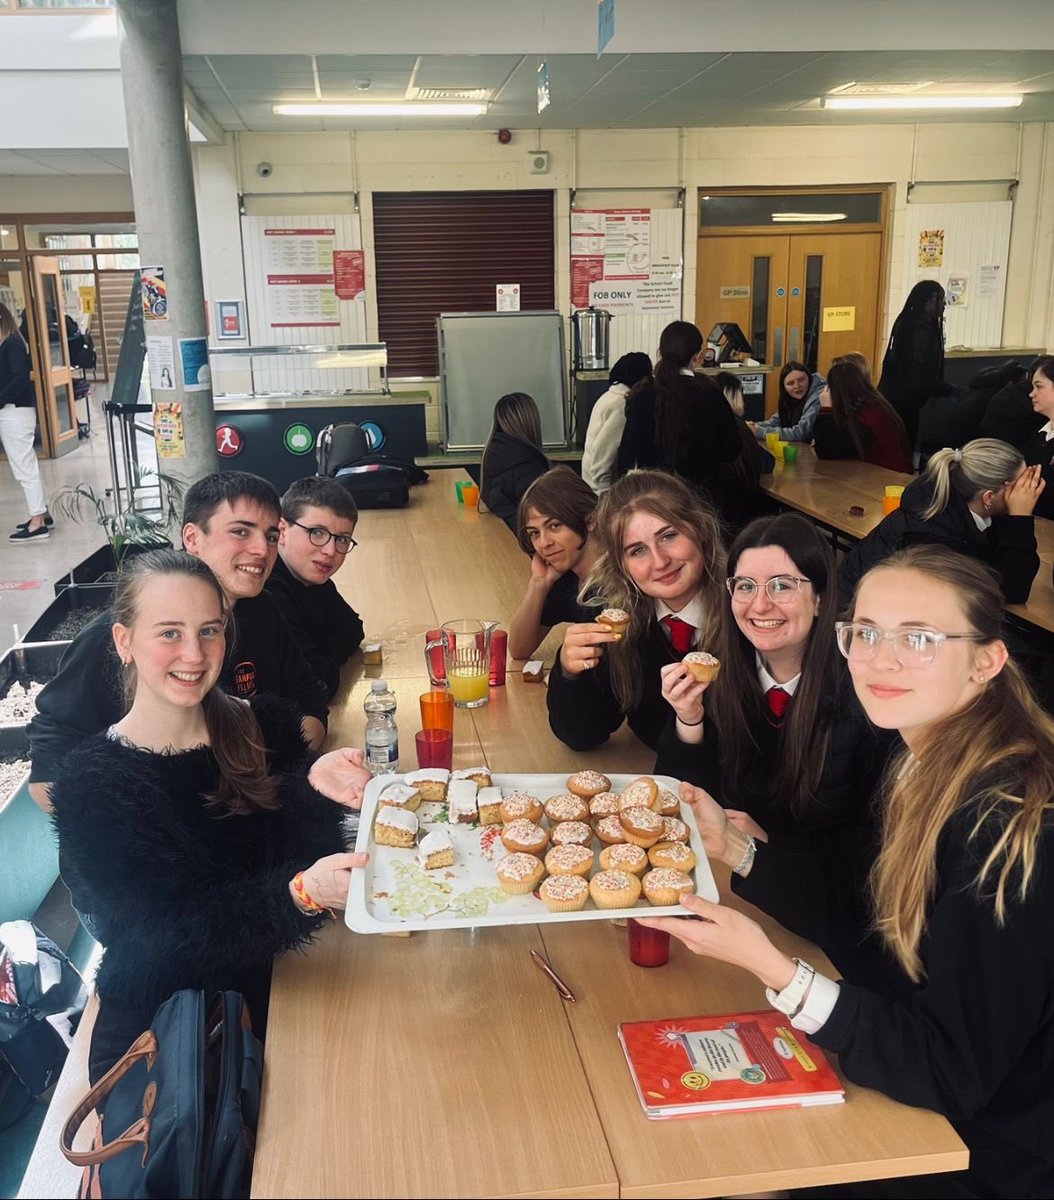 Our French visitors joined our TYs for some treats and even made their own Brioche for our TYs to sample! #TownTwinning @CeistTrust